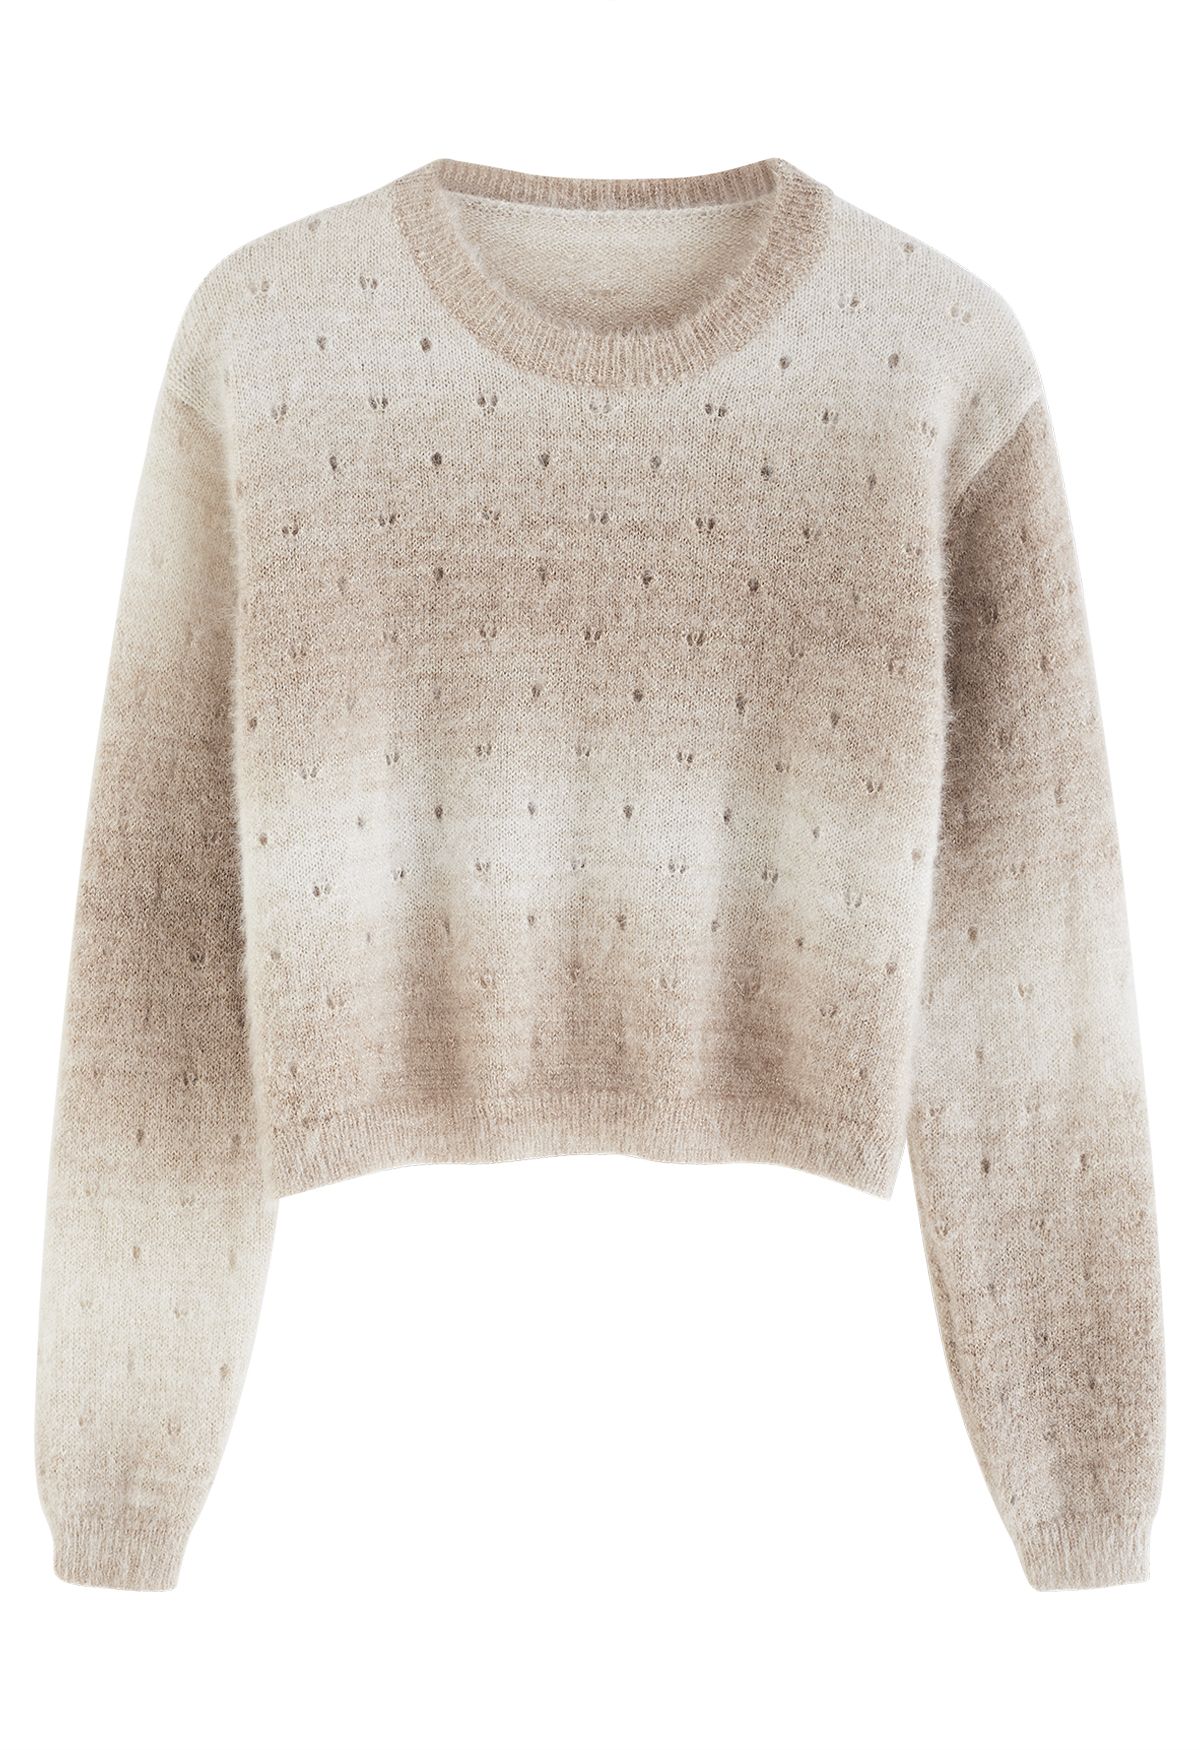 Ombre Eyelet Fuzzy Crop Sweater in Light Tan - Retro, Indie and Unique ...